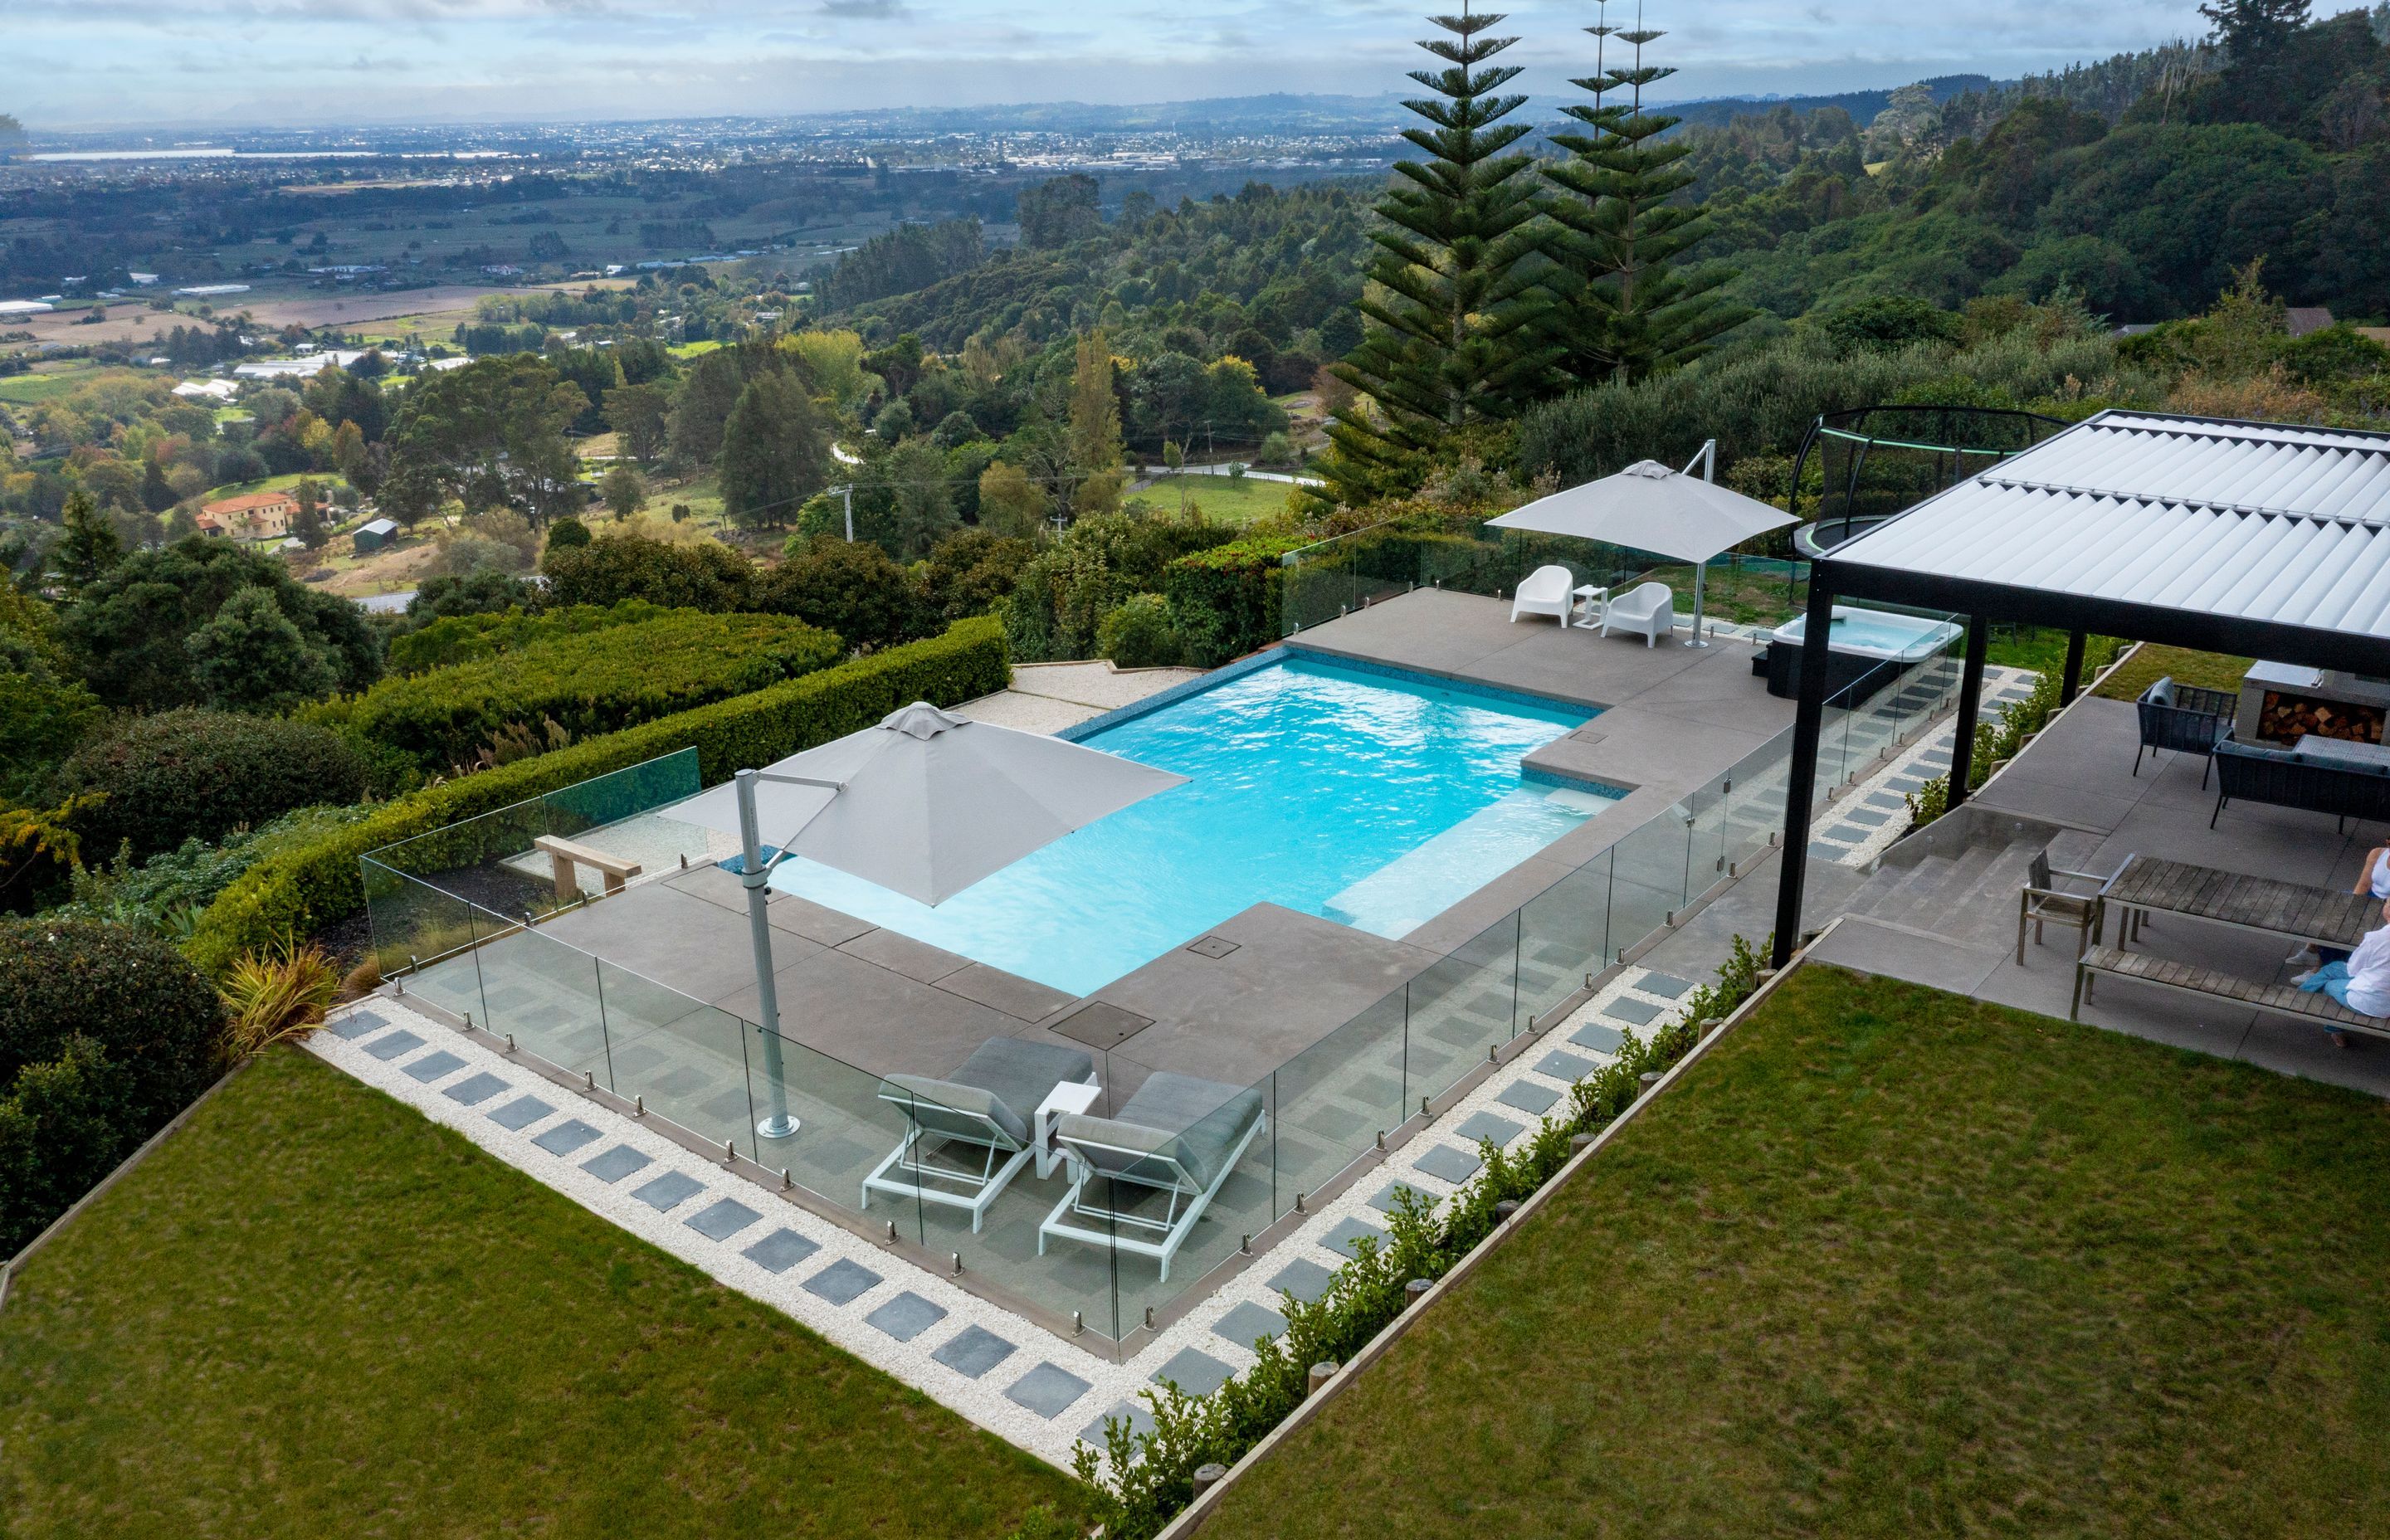 10m x 5m Pool with Step Out Area takes in the compelling views right across Auckland City, the Manukau Harbour and over to the Waitakere Ranges